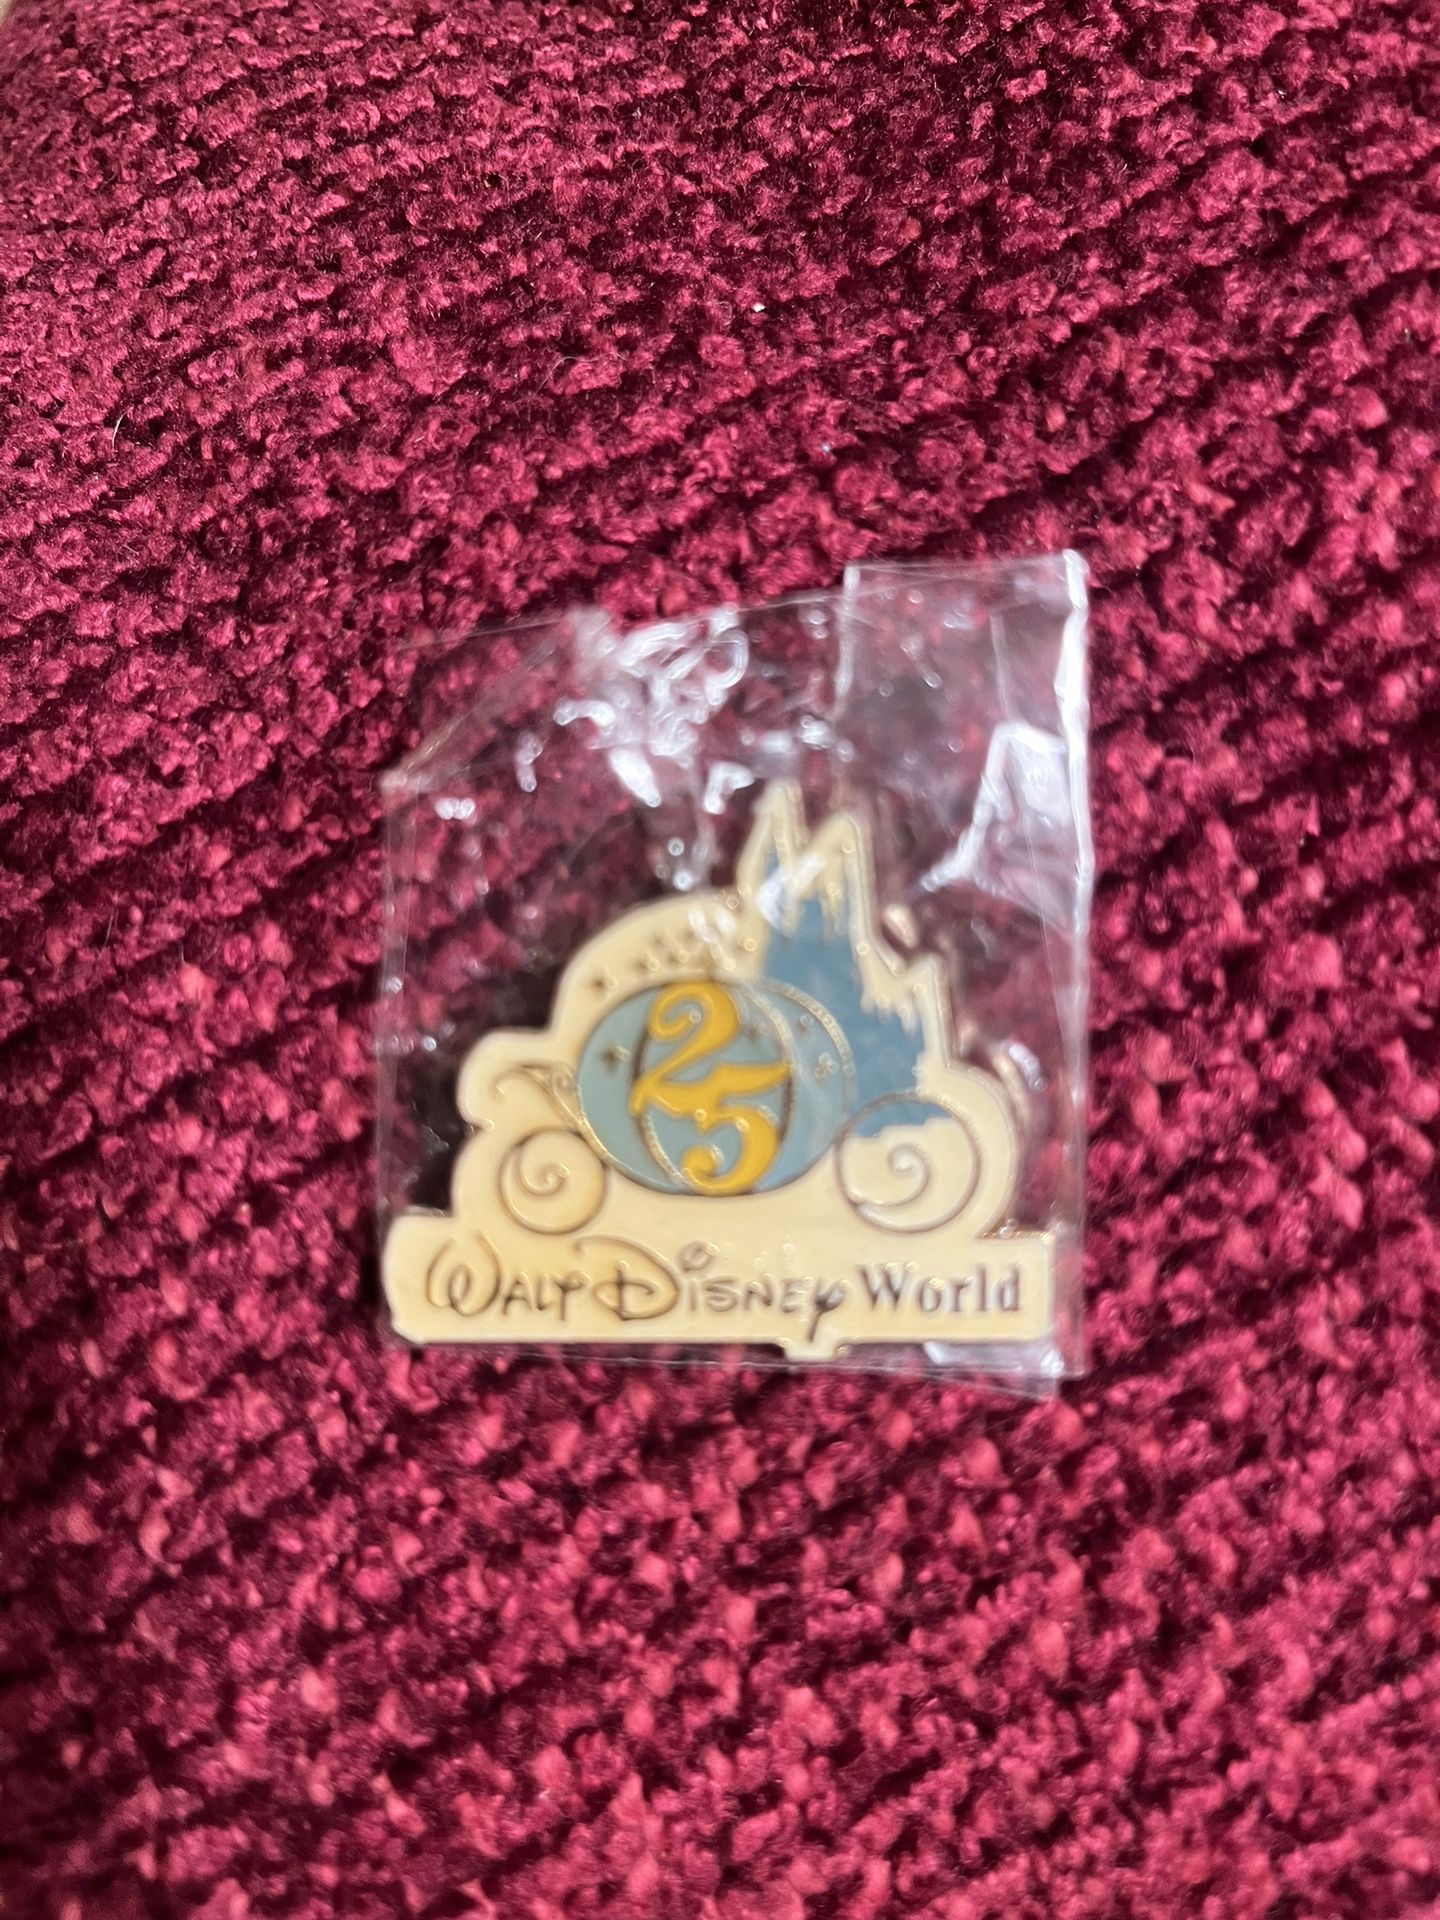 Walt Disney World 25th Anniversary Pin-Cinderellas Carriage And Castle -New!